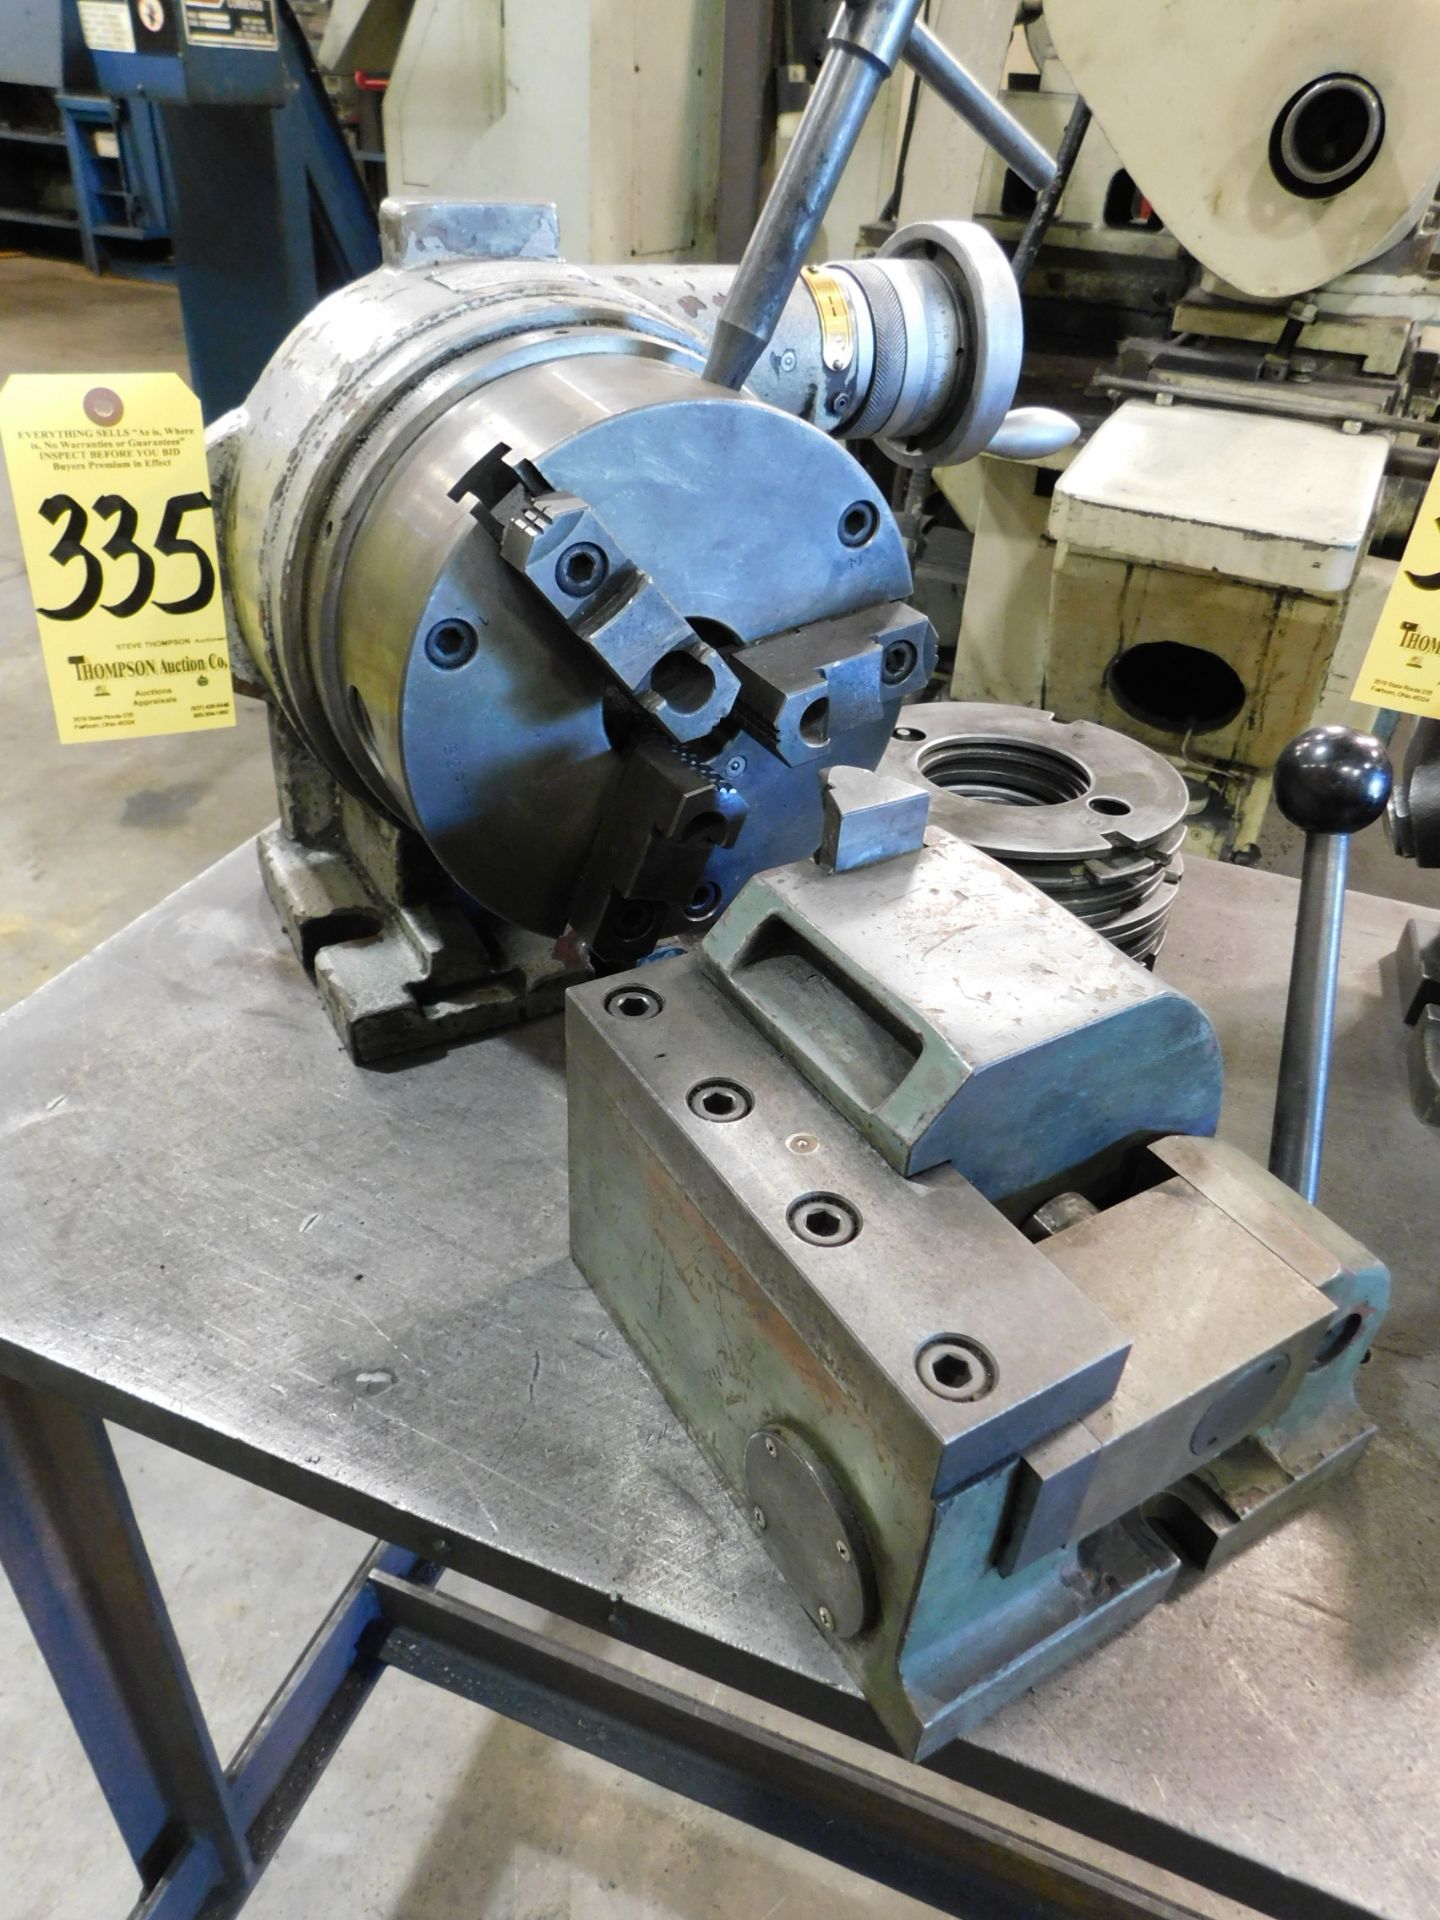 Yuasa Super Spacer with 8 inch 3-Jaw Chuck, Tailstock and Index Plates